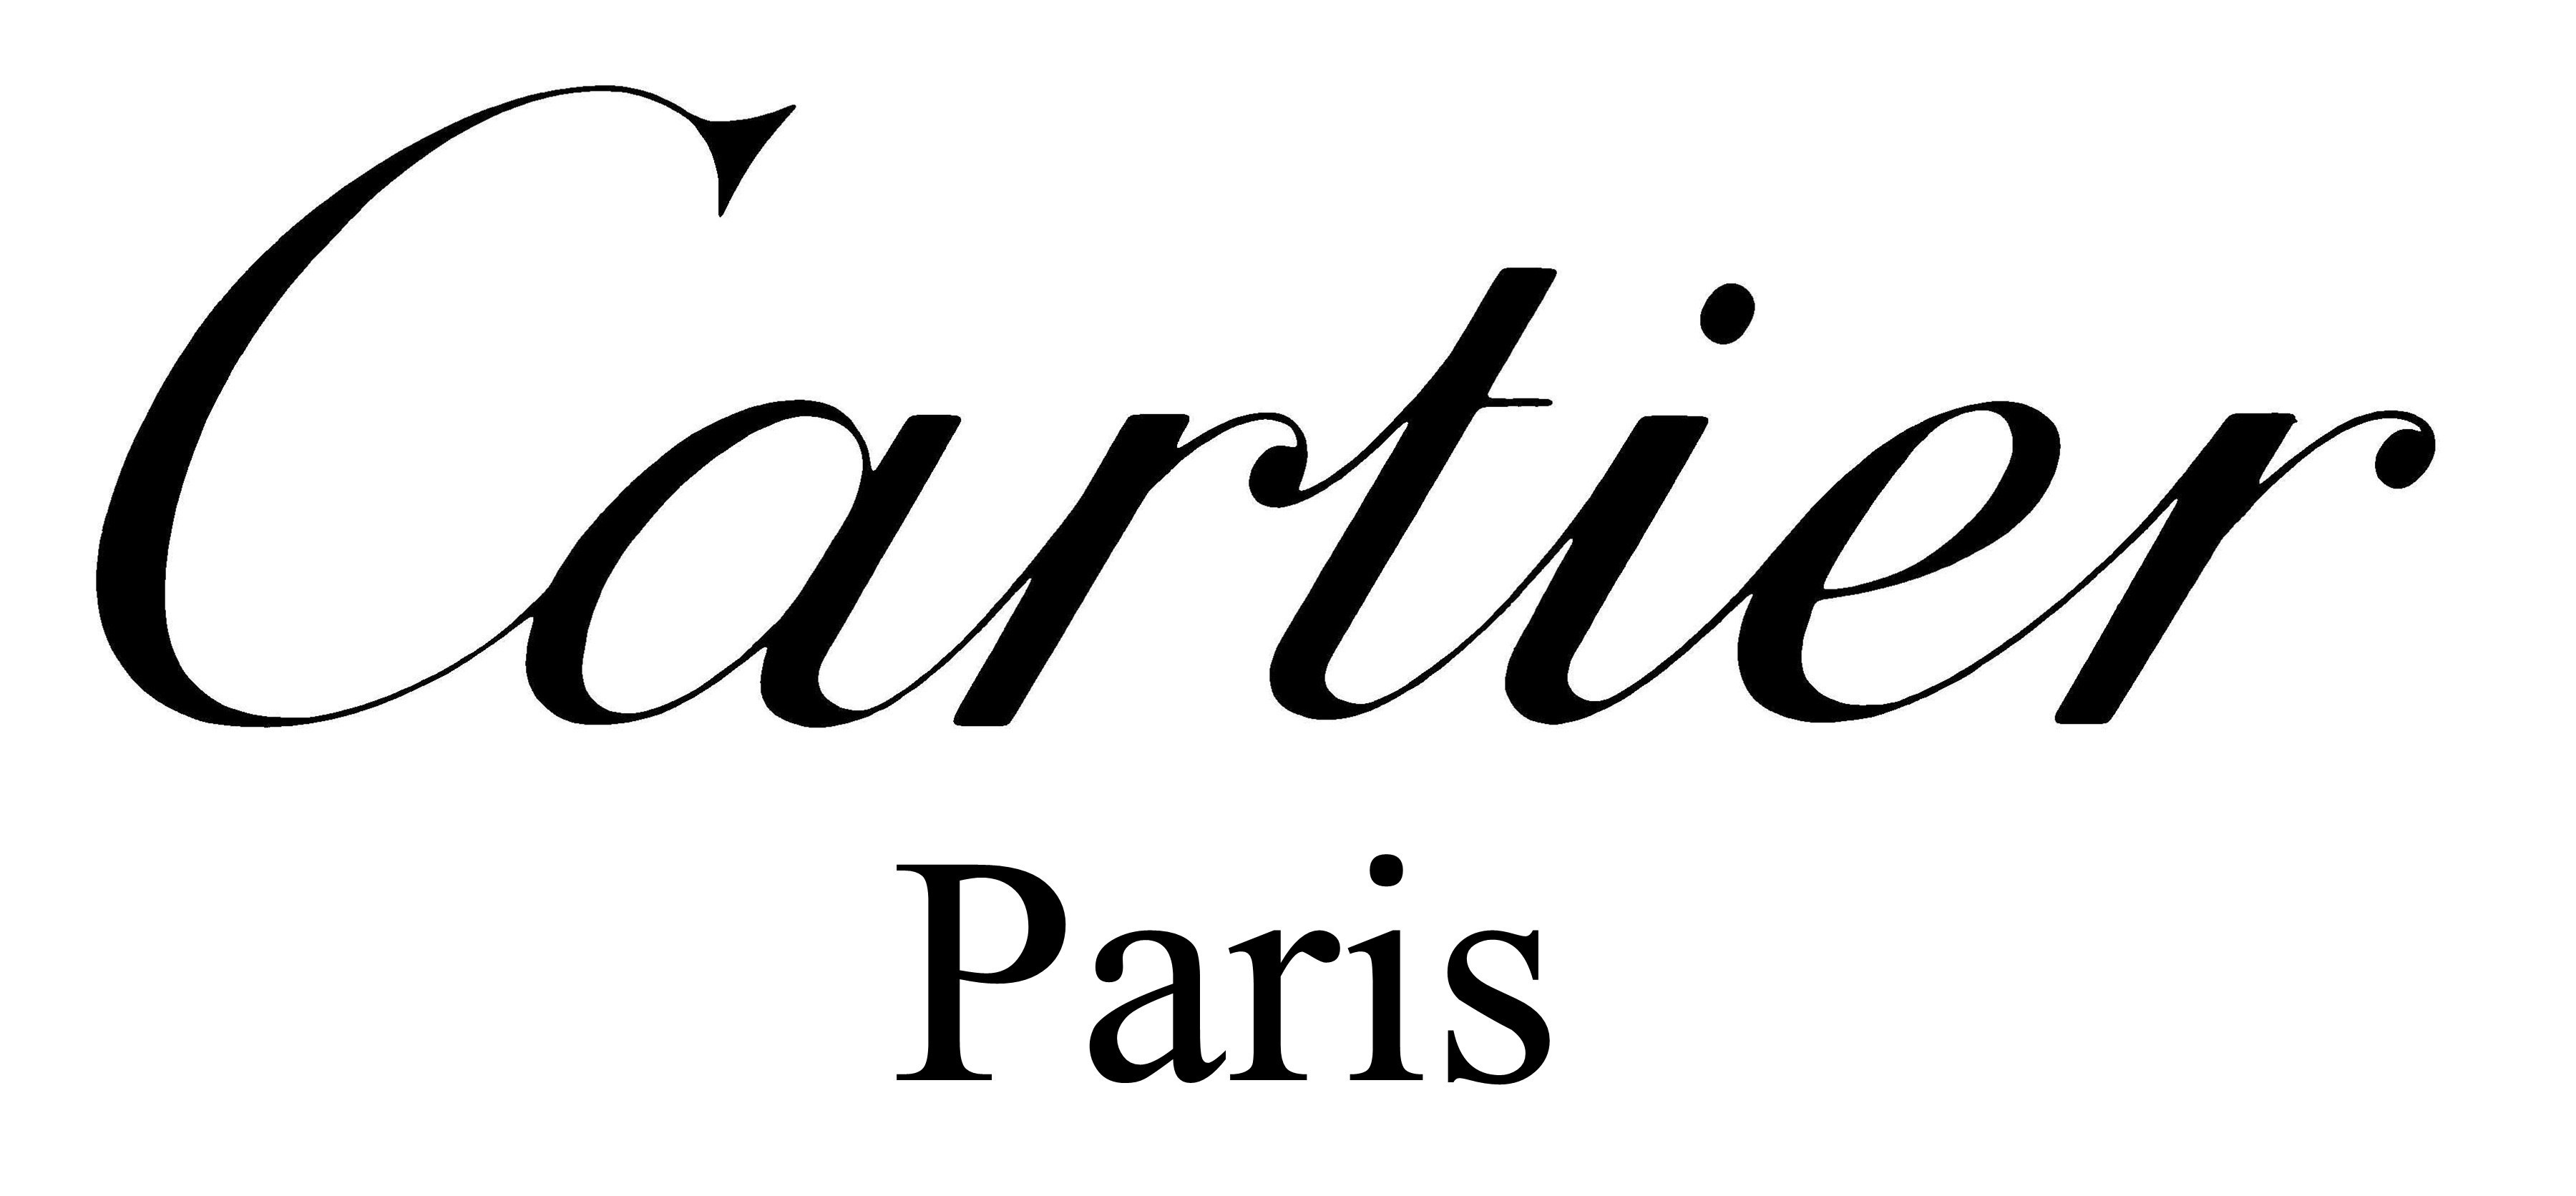 Cartier: One of the world's leading luxury goods companies, Black and white logo. 3600x1680 Dual Screen Background.